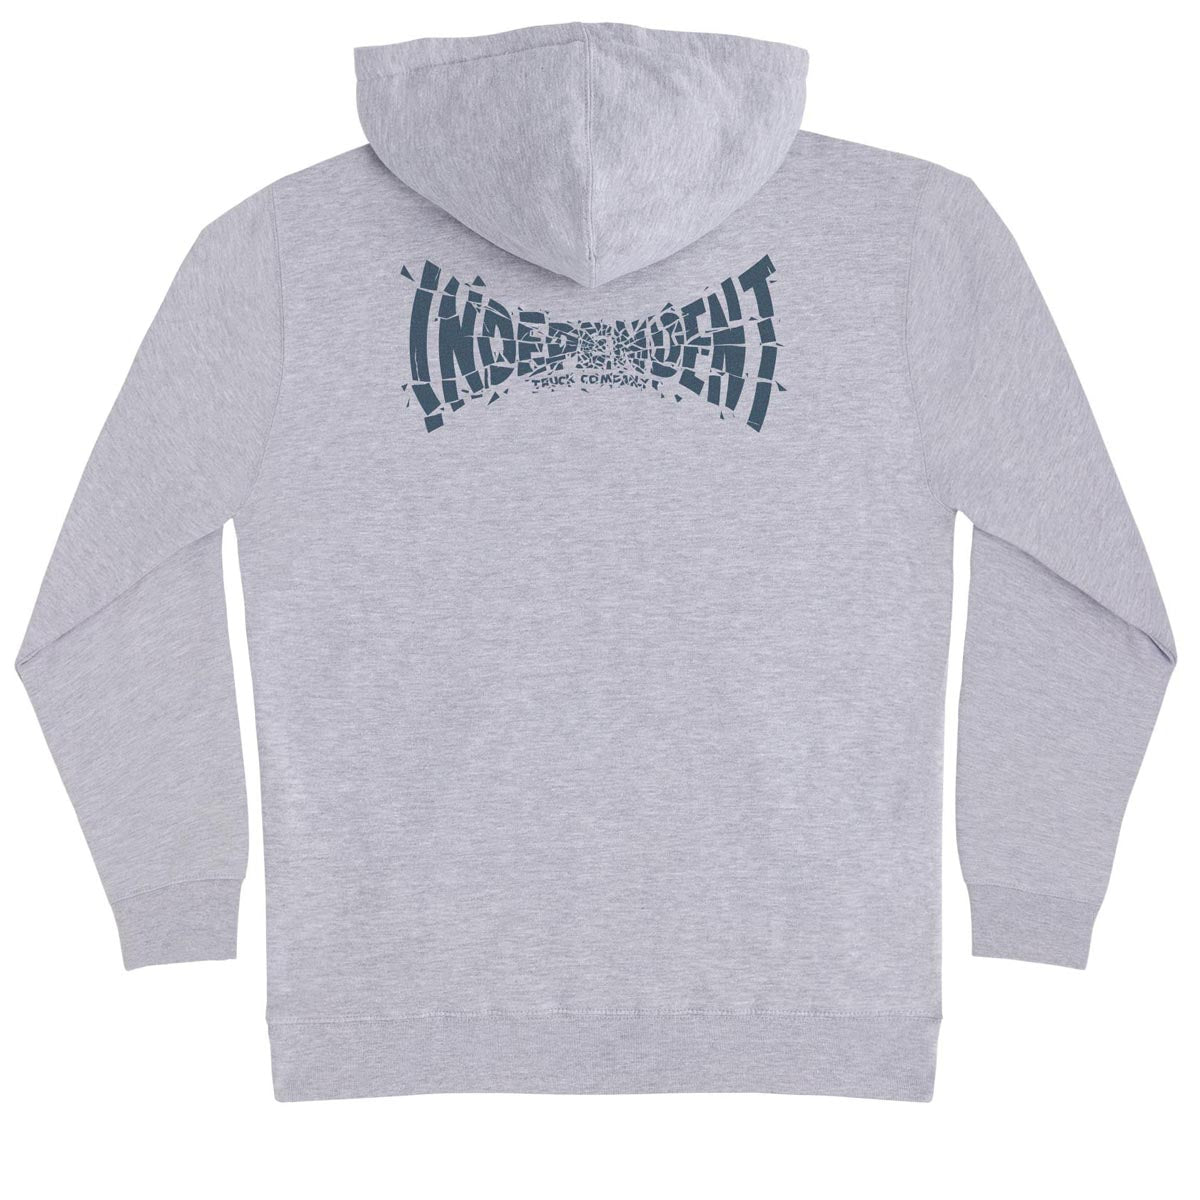 Independent Shatter Span Hoodie - Heather Grey image 2